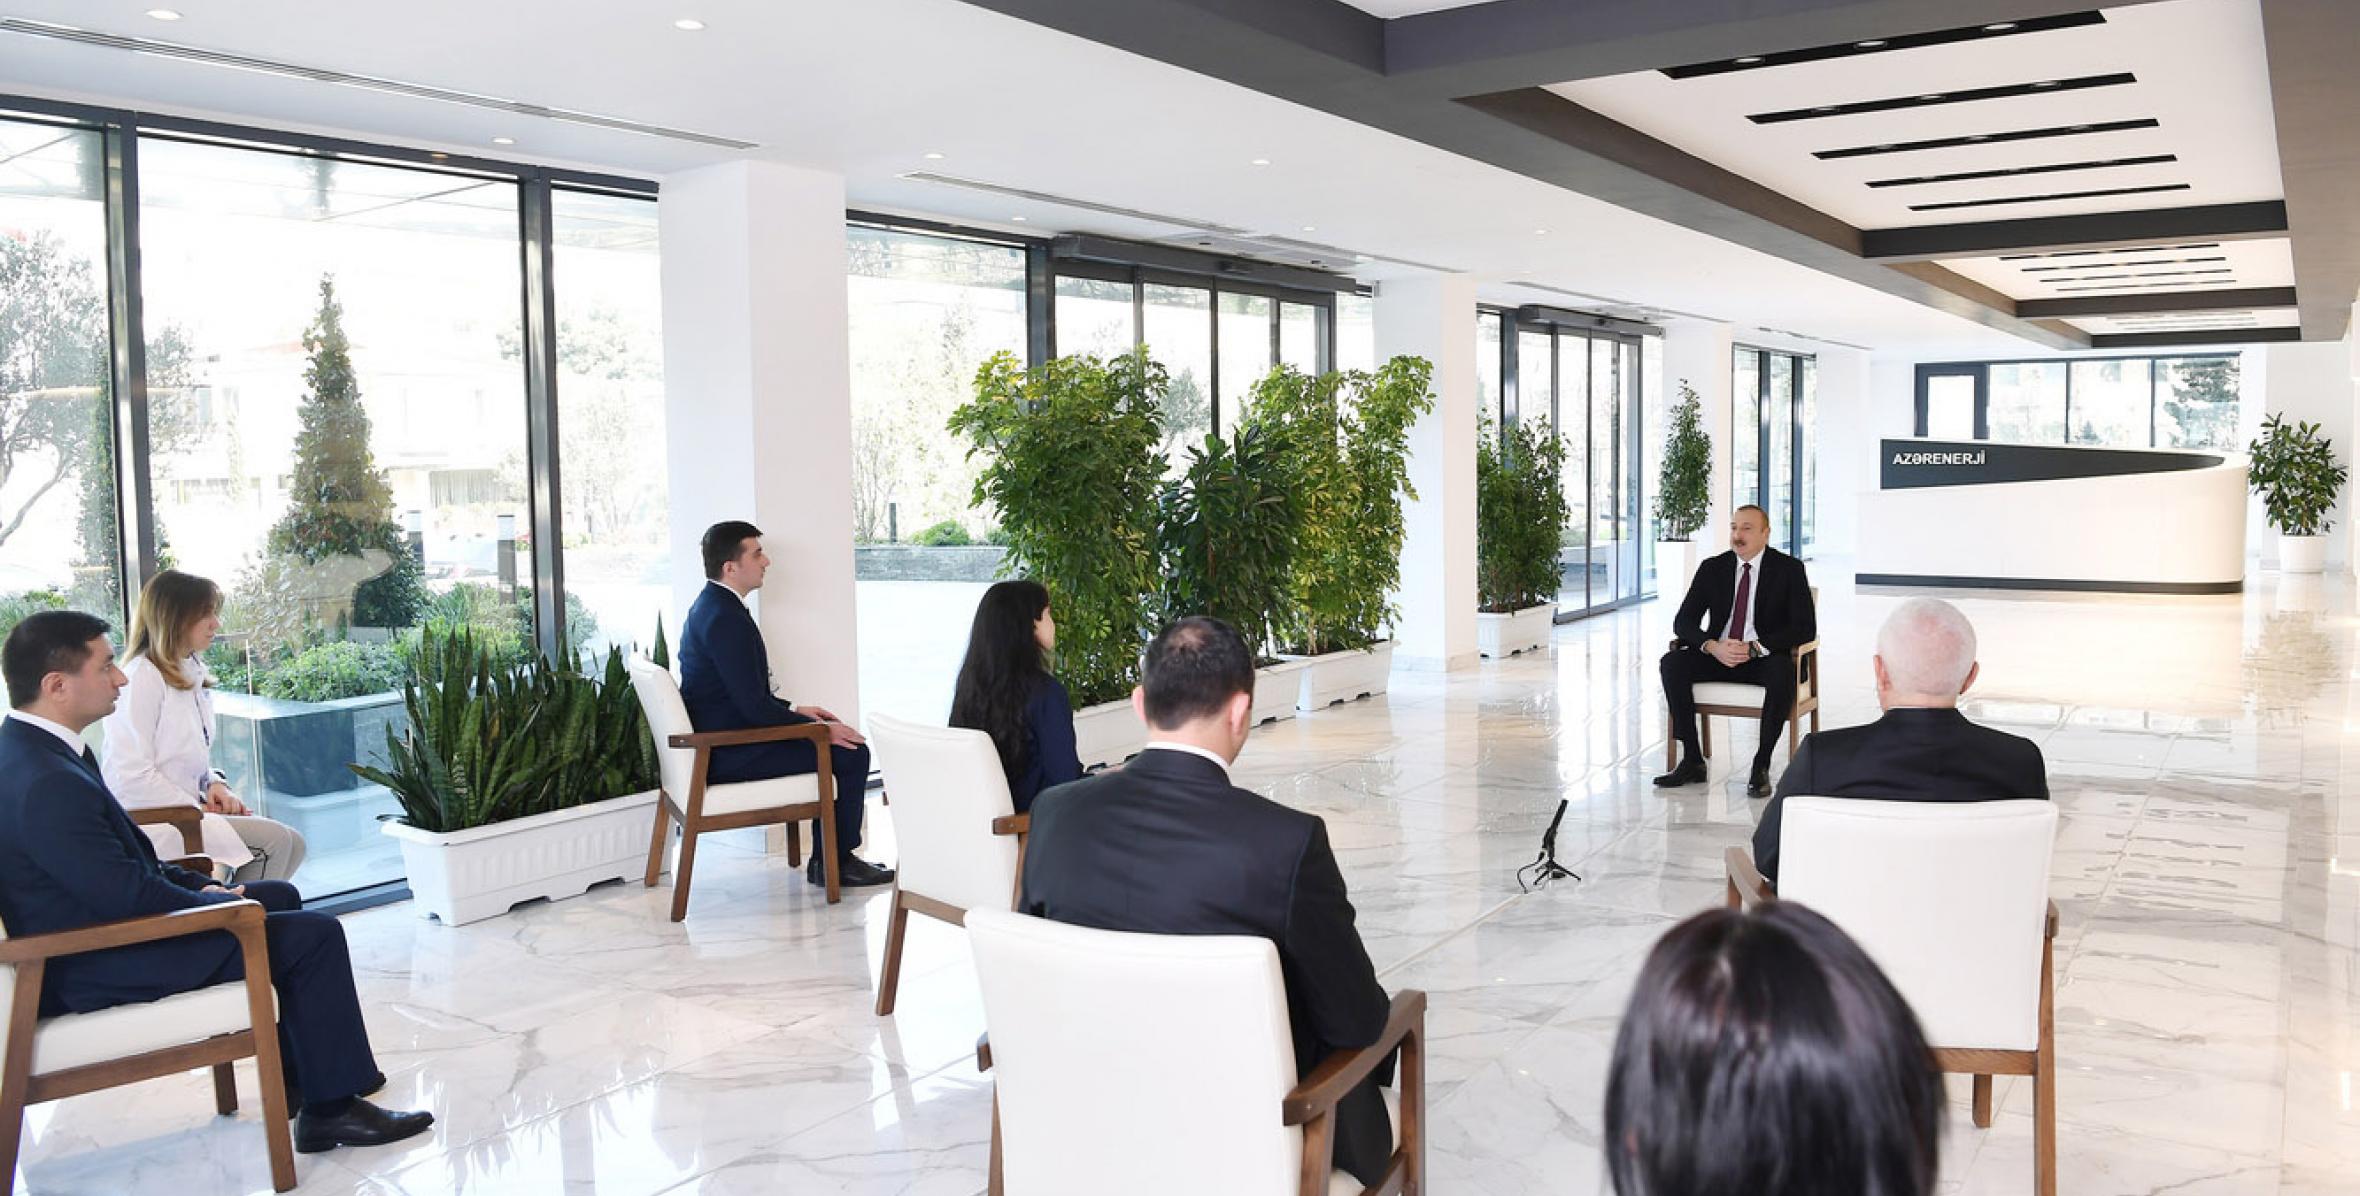 Speech by Ilham Aliyev at the opening of the newly-reconstructed main administrative, scientific, educational and laboratory complex of AzerEnergy Open Joint Stock Company in Baku